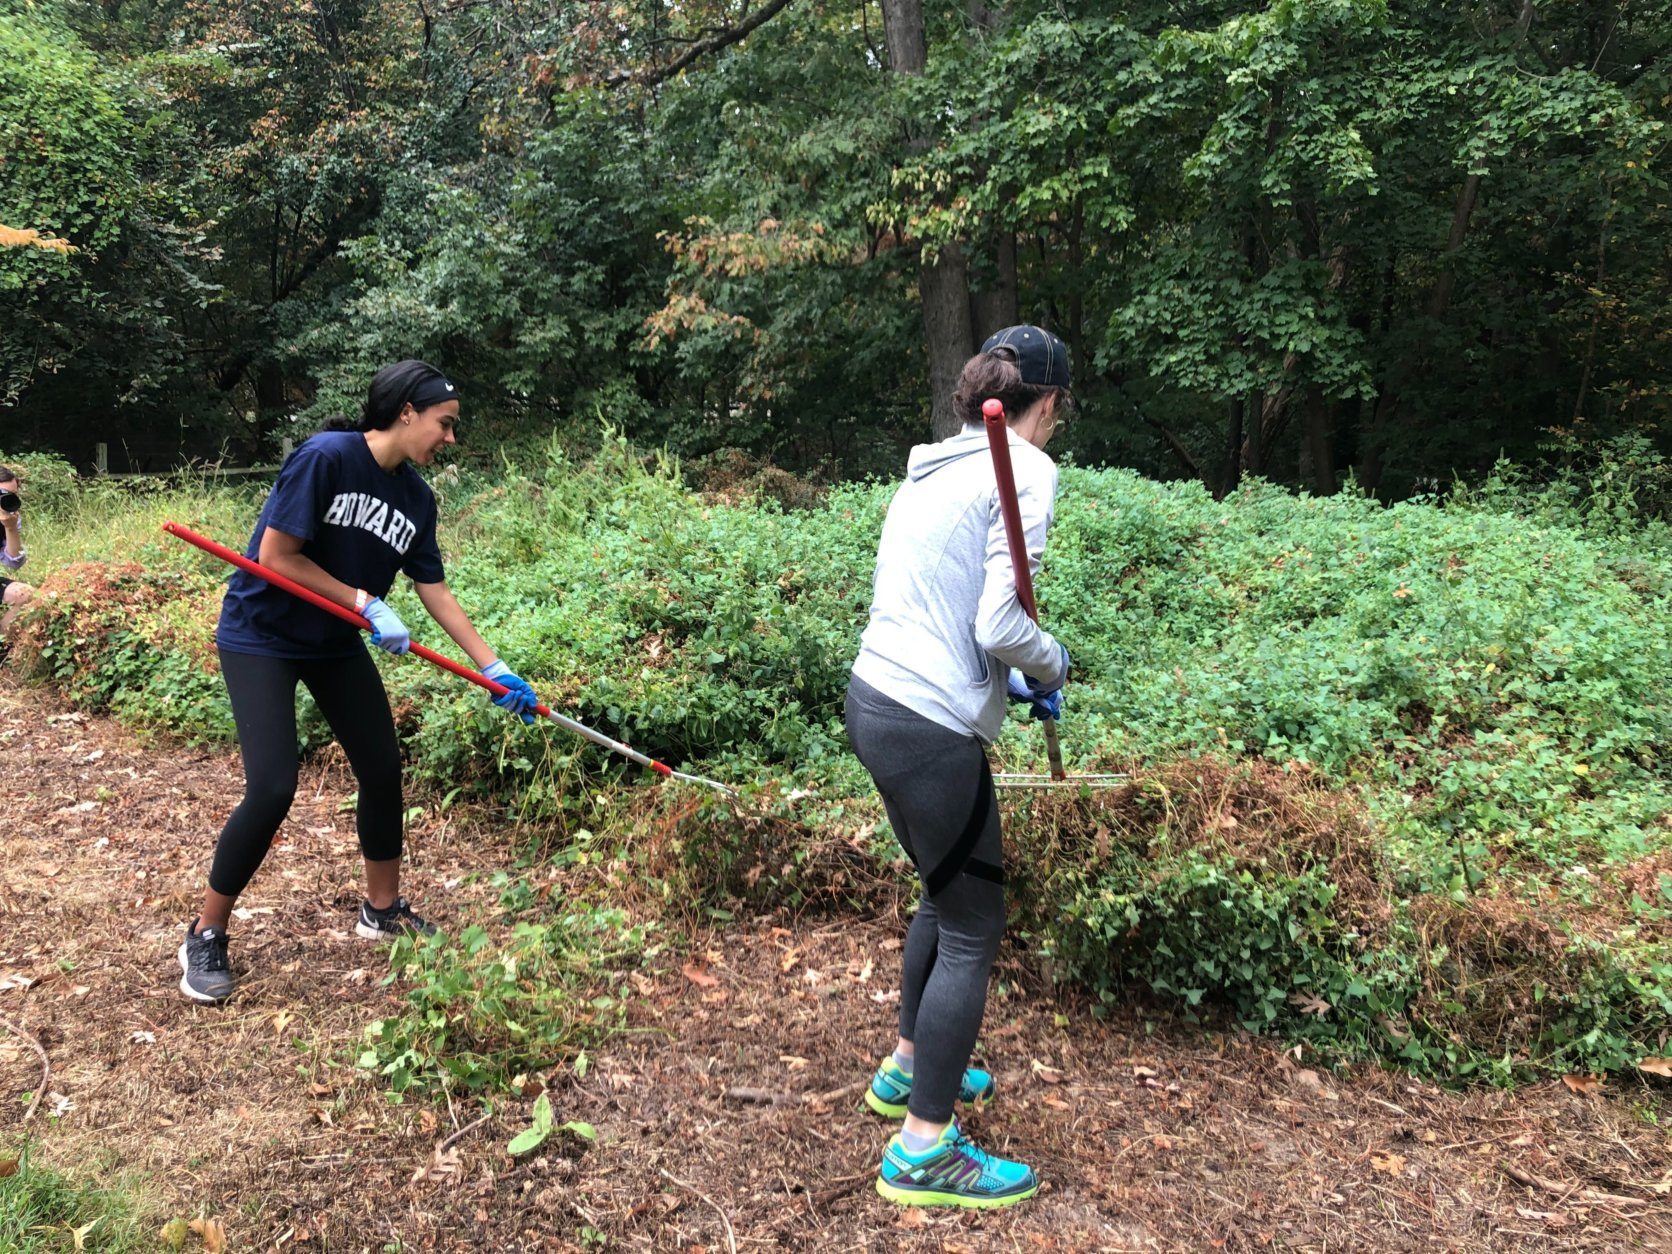 Maintaining trails, clearing invasive species and picking up litter were just a few of the tasks volunteers were assigned.